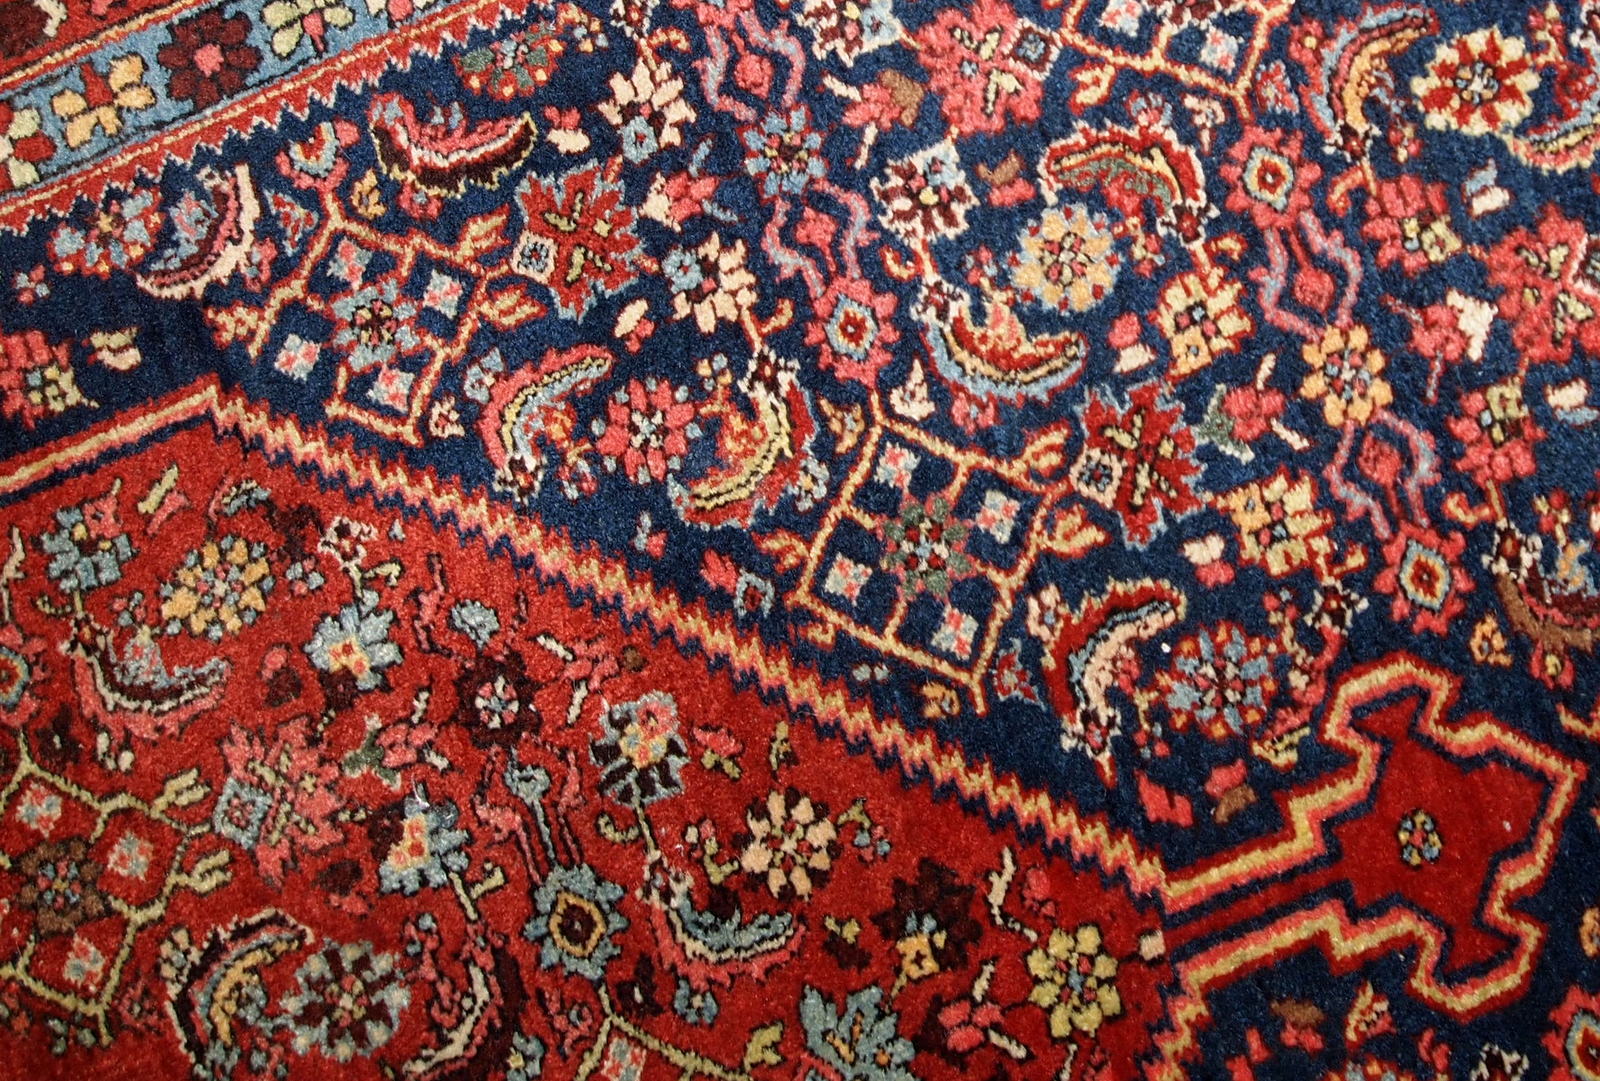 Handmade antique Bidjar rug from the beginning of 20th century. The rug is in original good condition made in red and blue wool.